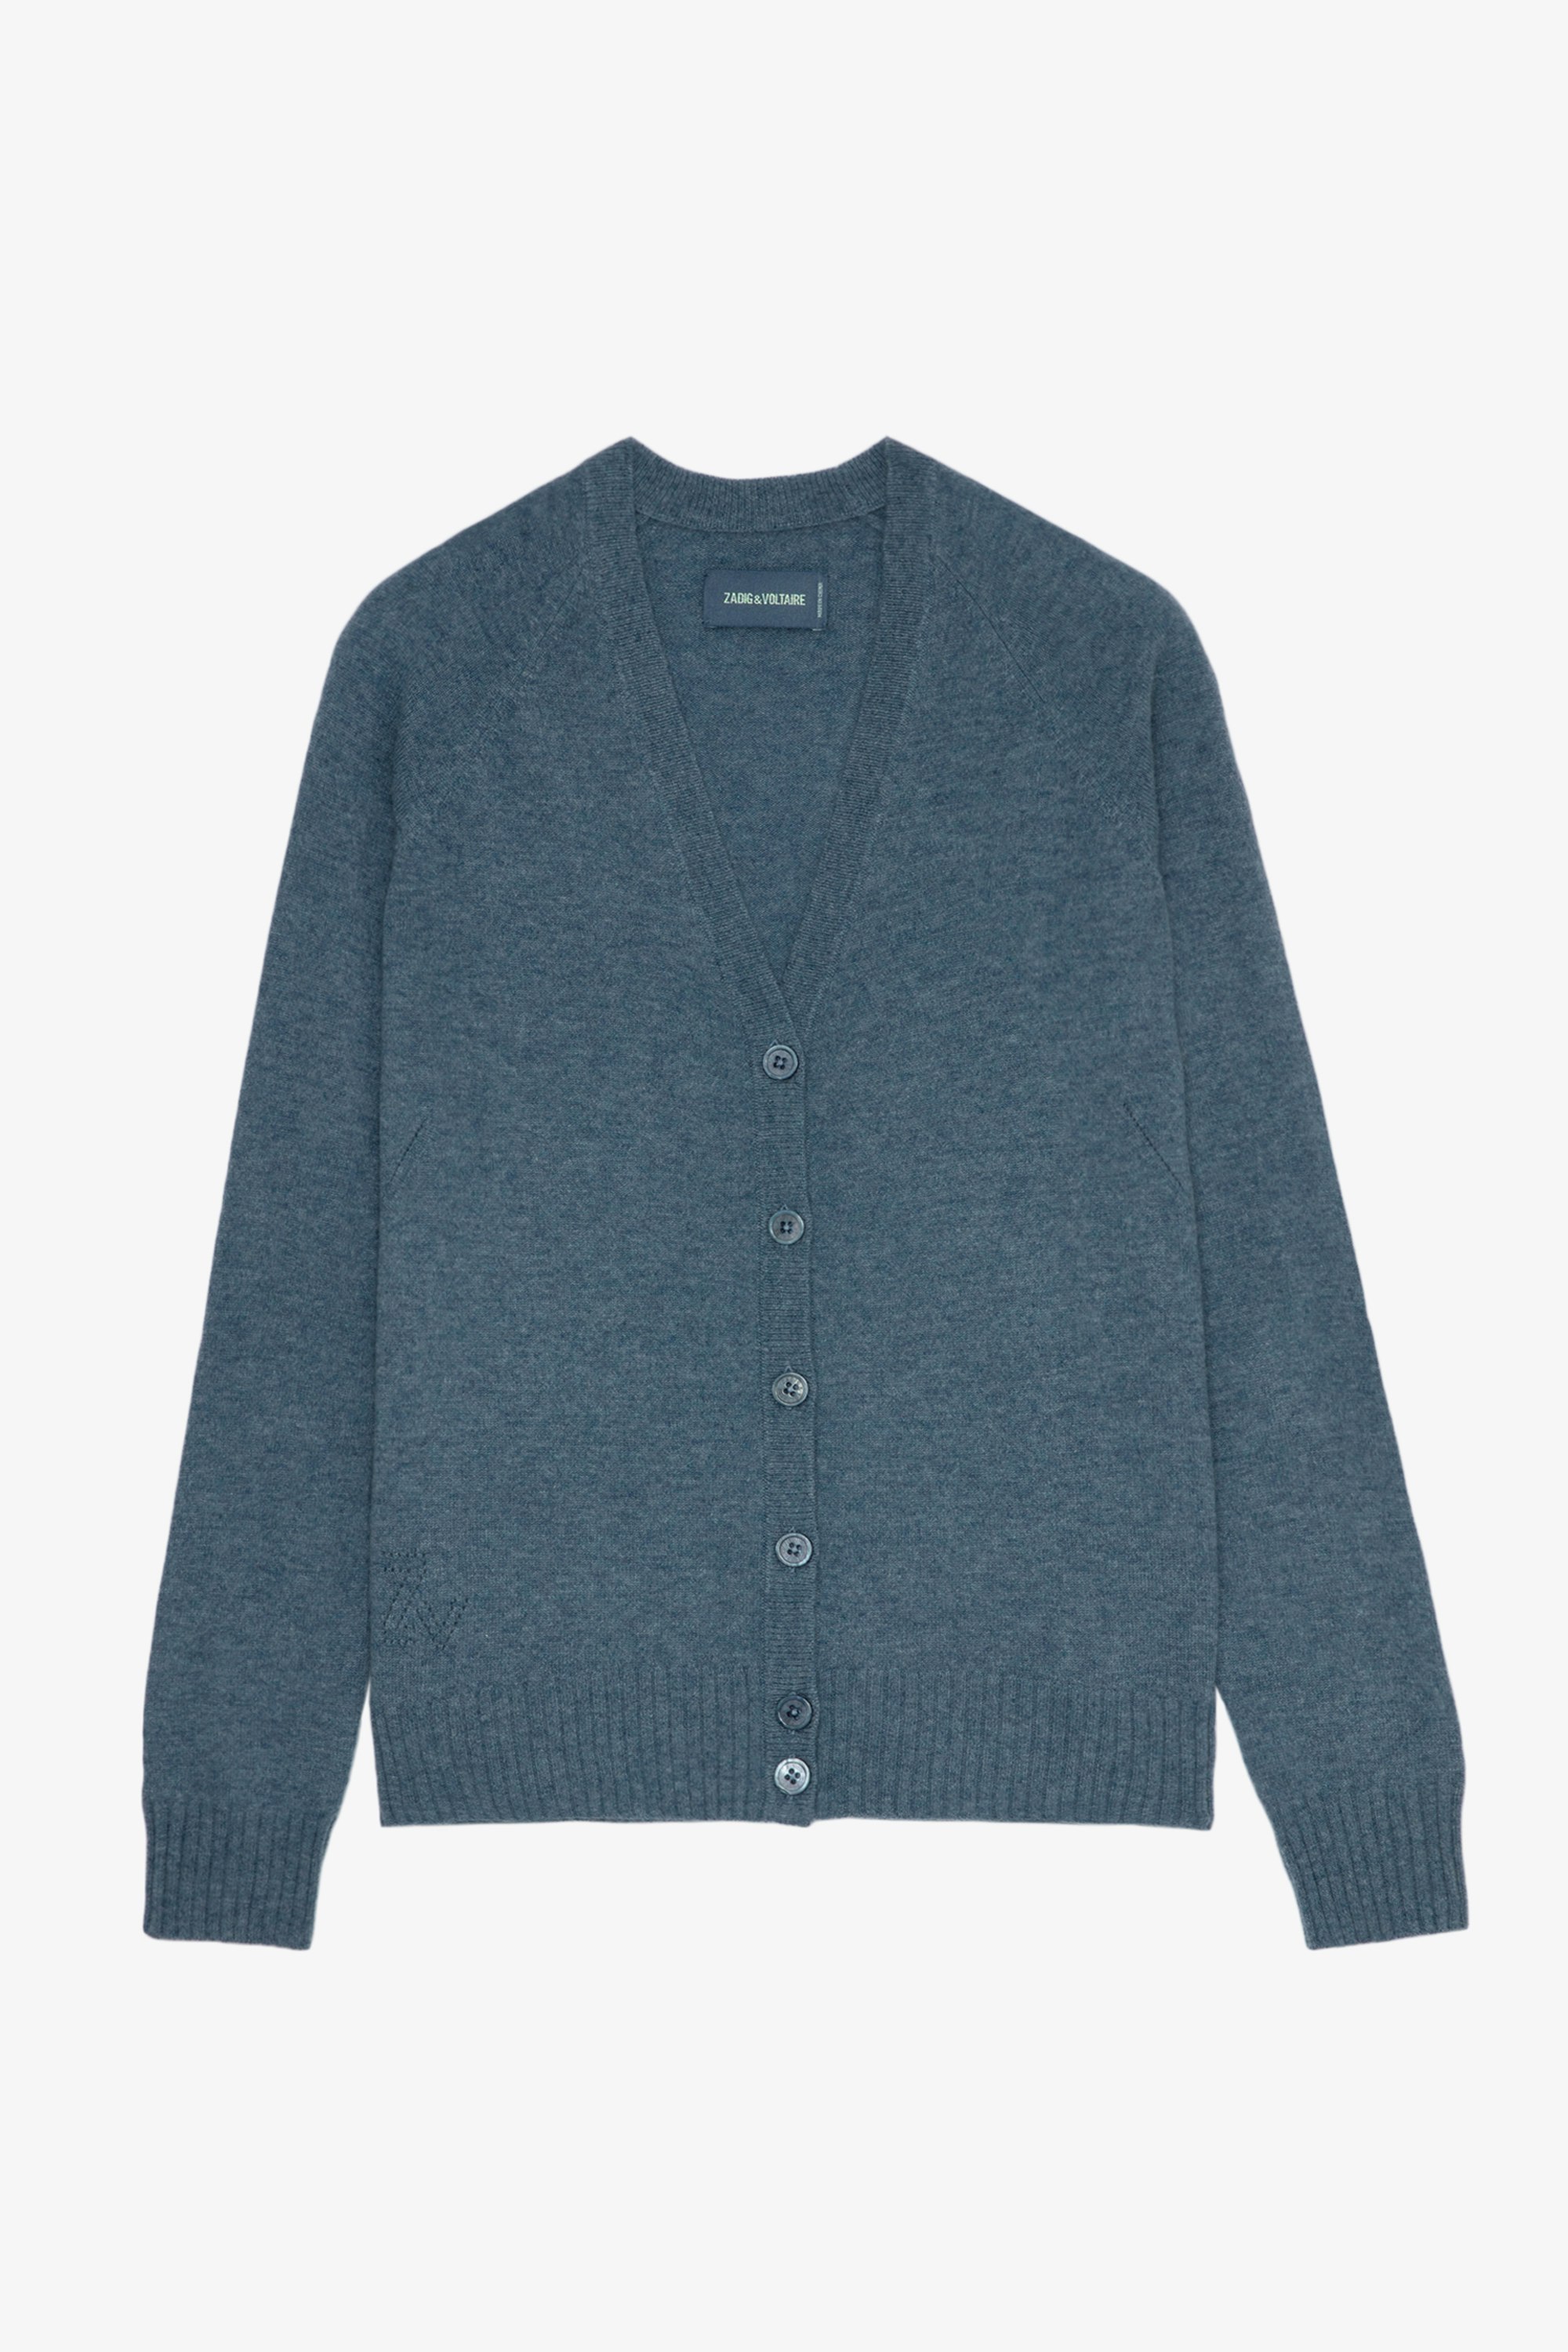 Jim Patch Cashmere Cardigan - Women’s blue cashmere cardigan with star patches on the sleeves.